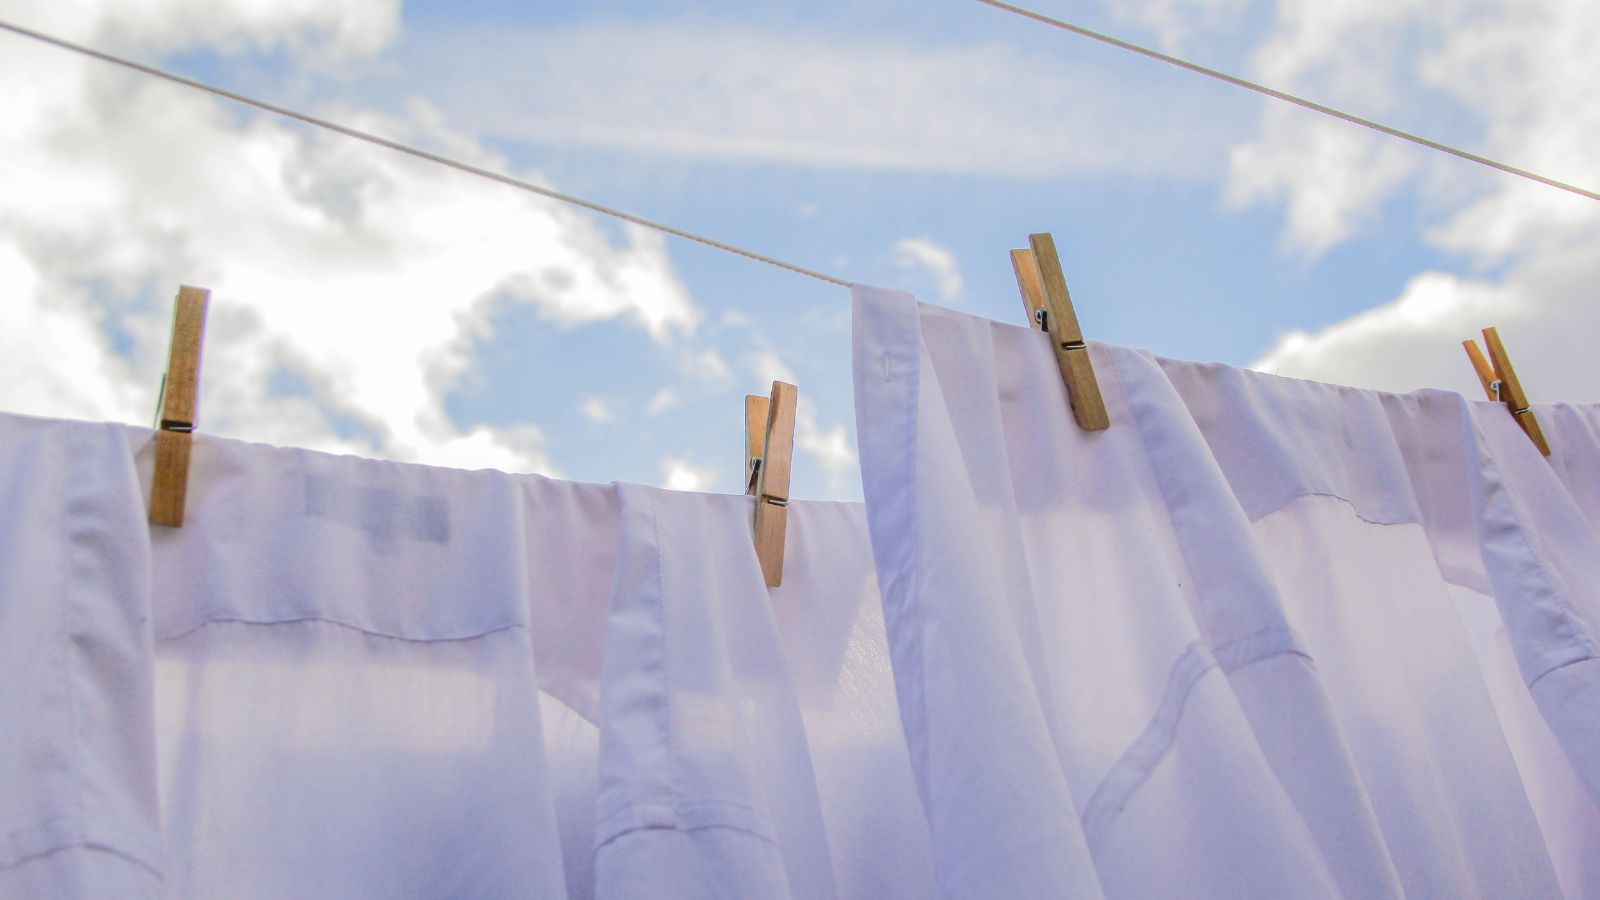 Why you should air dry your laundry - The Washington Post